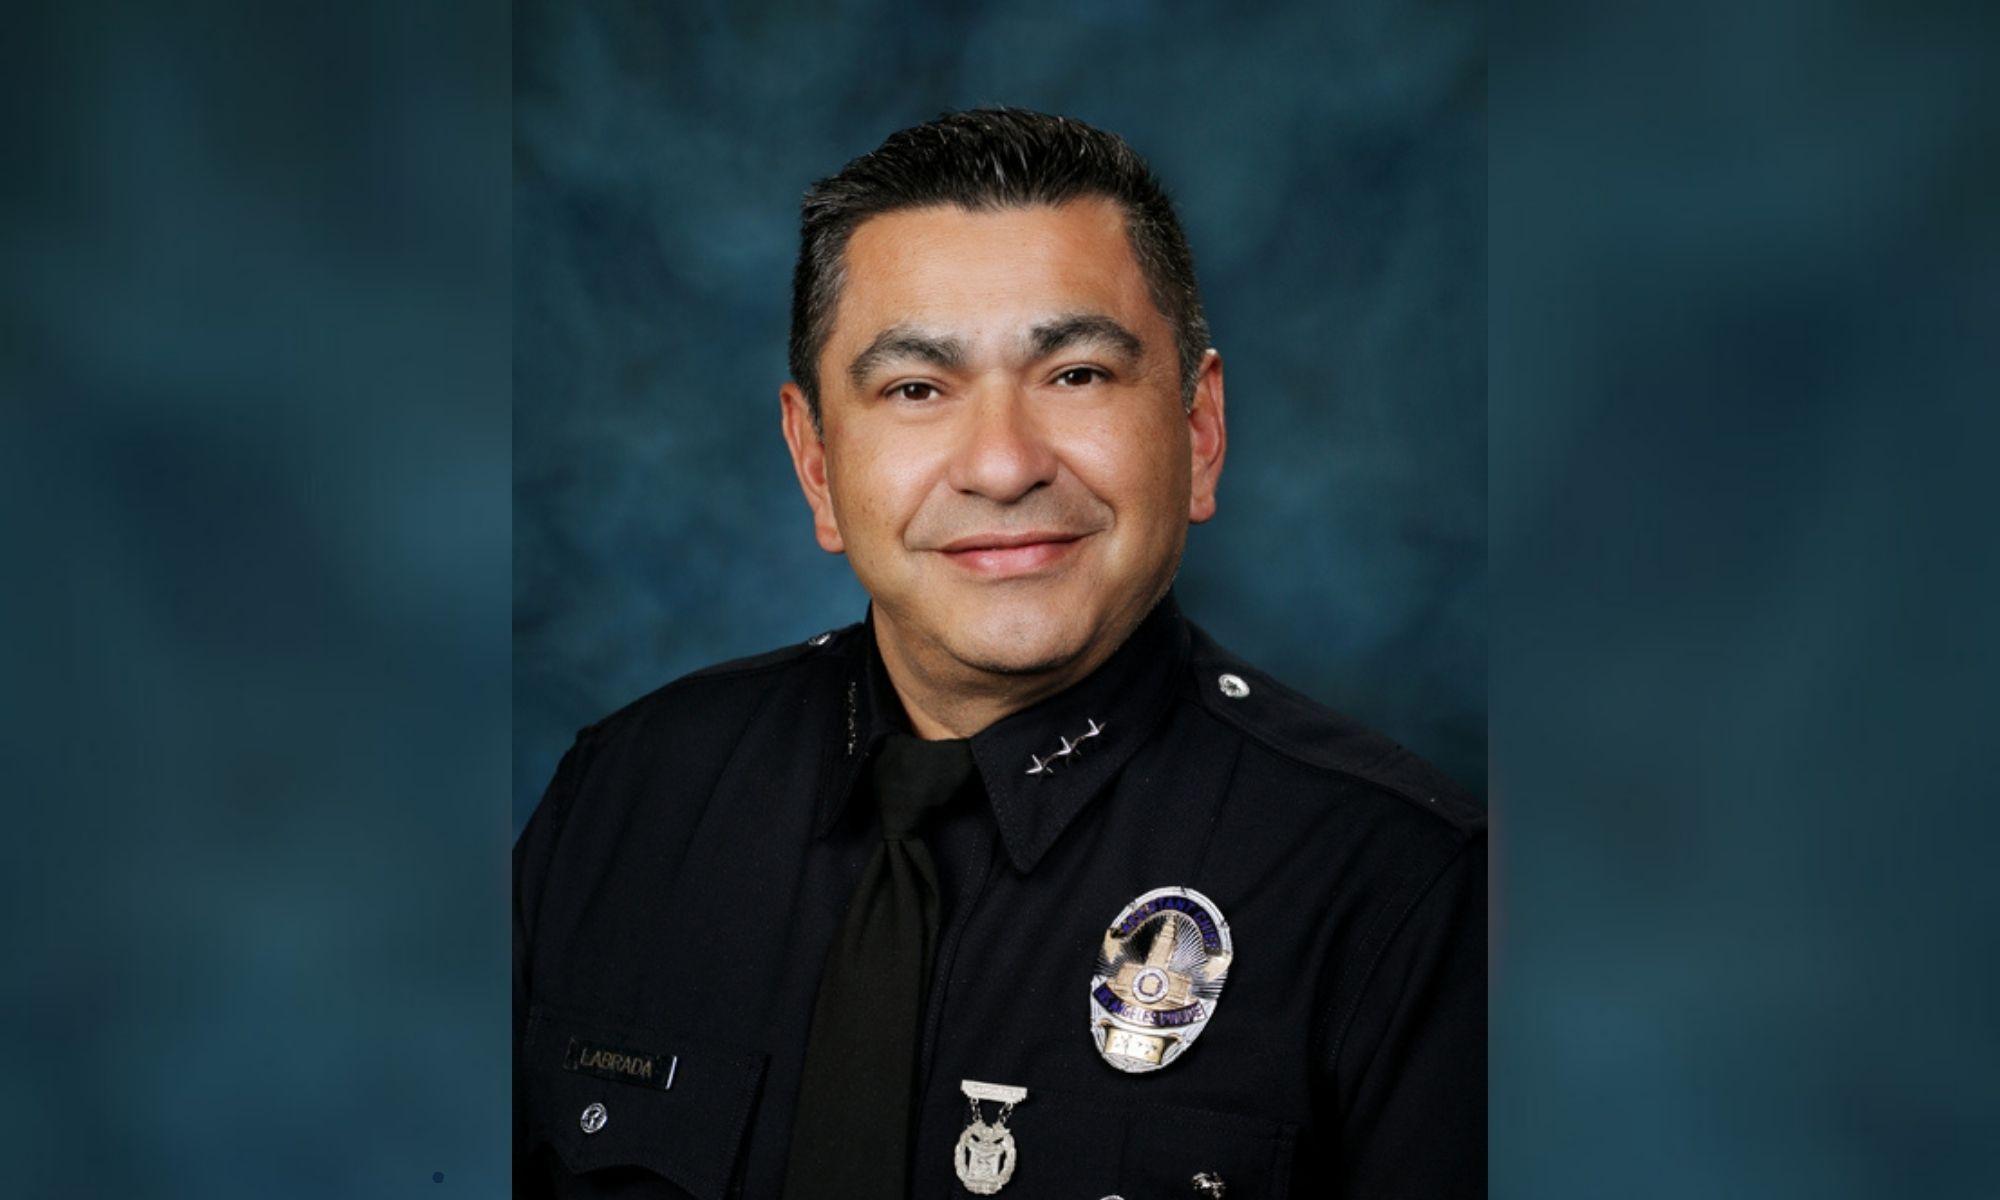 LAPD Assistant Chief Under Investigation for Possible Stalking of Another Officer